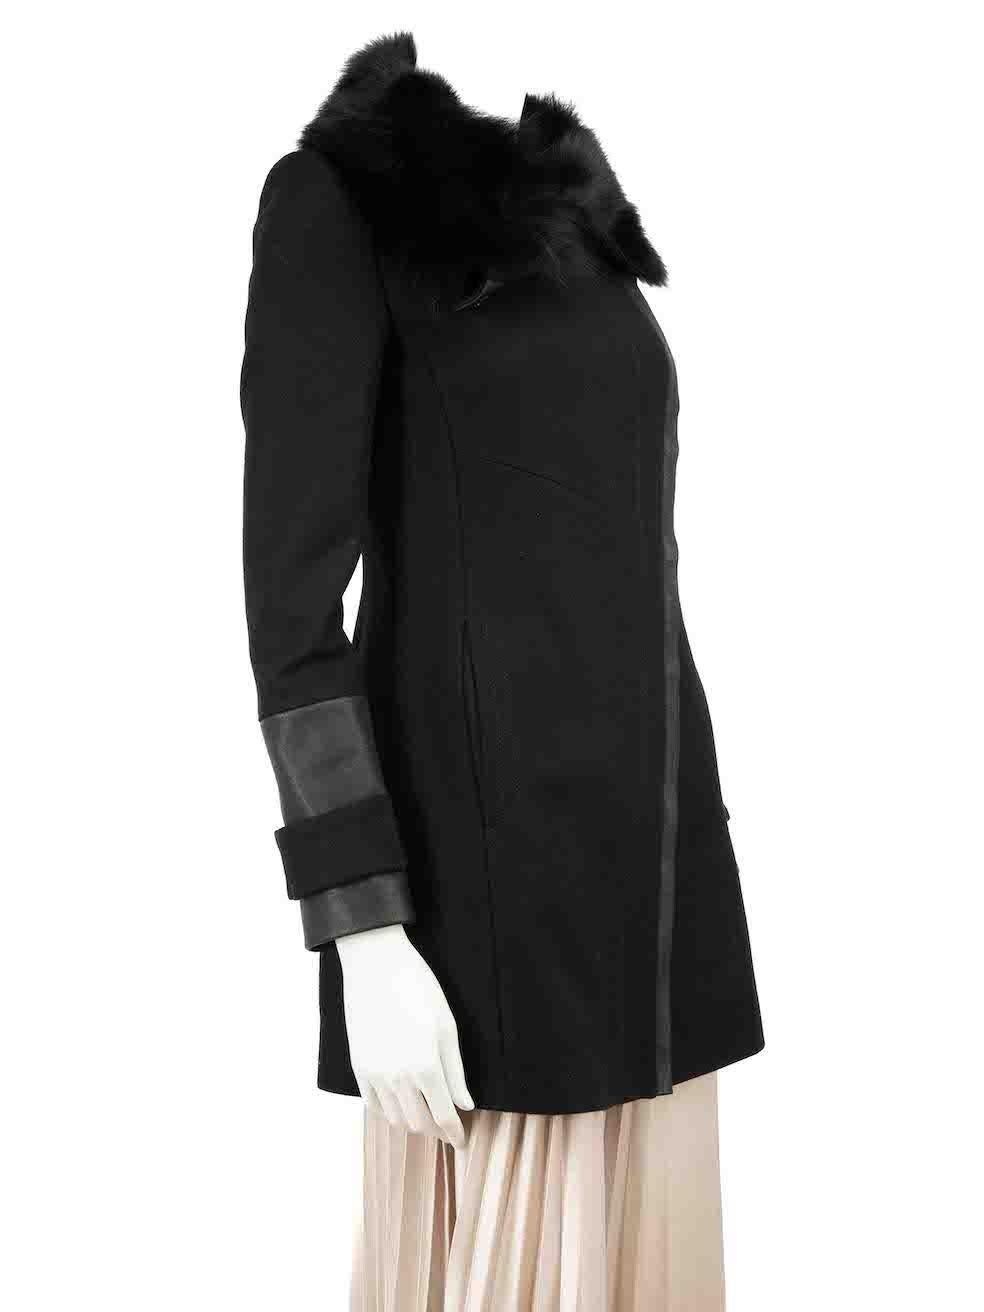 CONDITION is Very good. Hardly any visible wear to coat is evident on this used Pinko designer resale item.
 
Details
Black
Wool
Coat
Single breasted
Asymmetric zip fastening
Fur trim collar
Neck snap button fastening
2x Side pockets
 
Made in